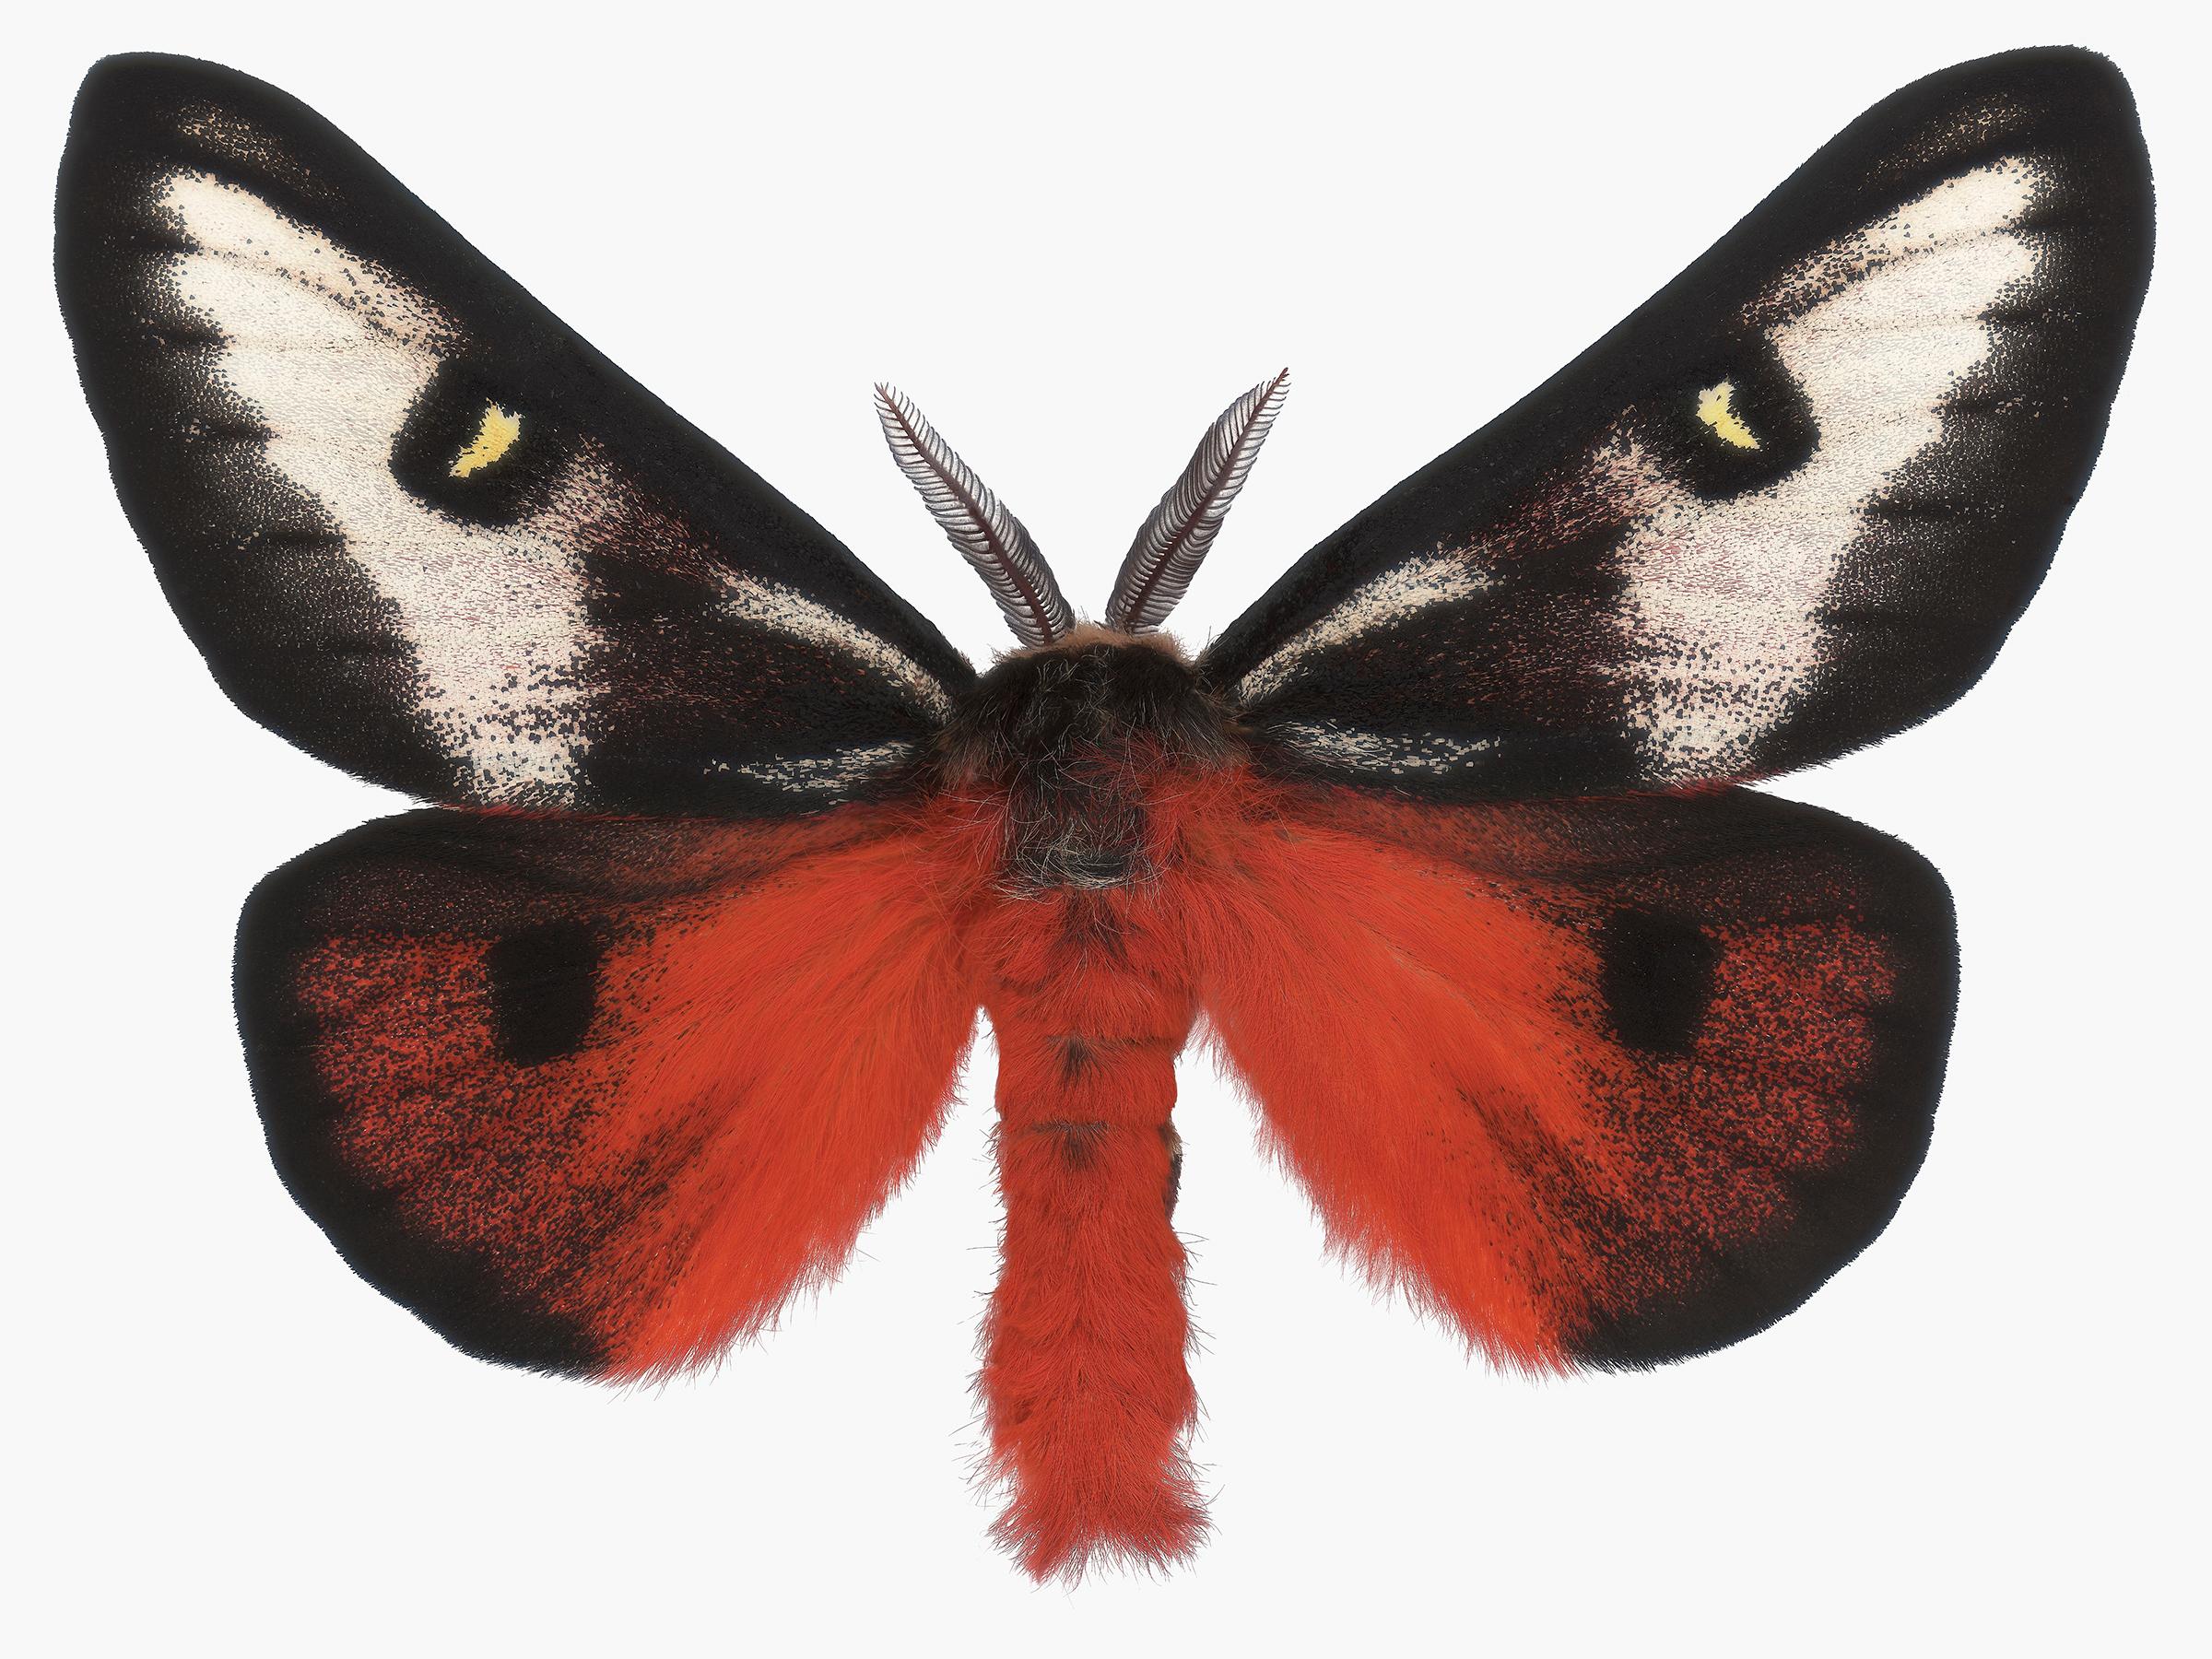 Color Photograph Joseph Scheer - Hemileuca Electra, Red Orange, Black, Yellow White Moth Insect Nature Photographie